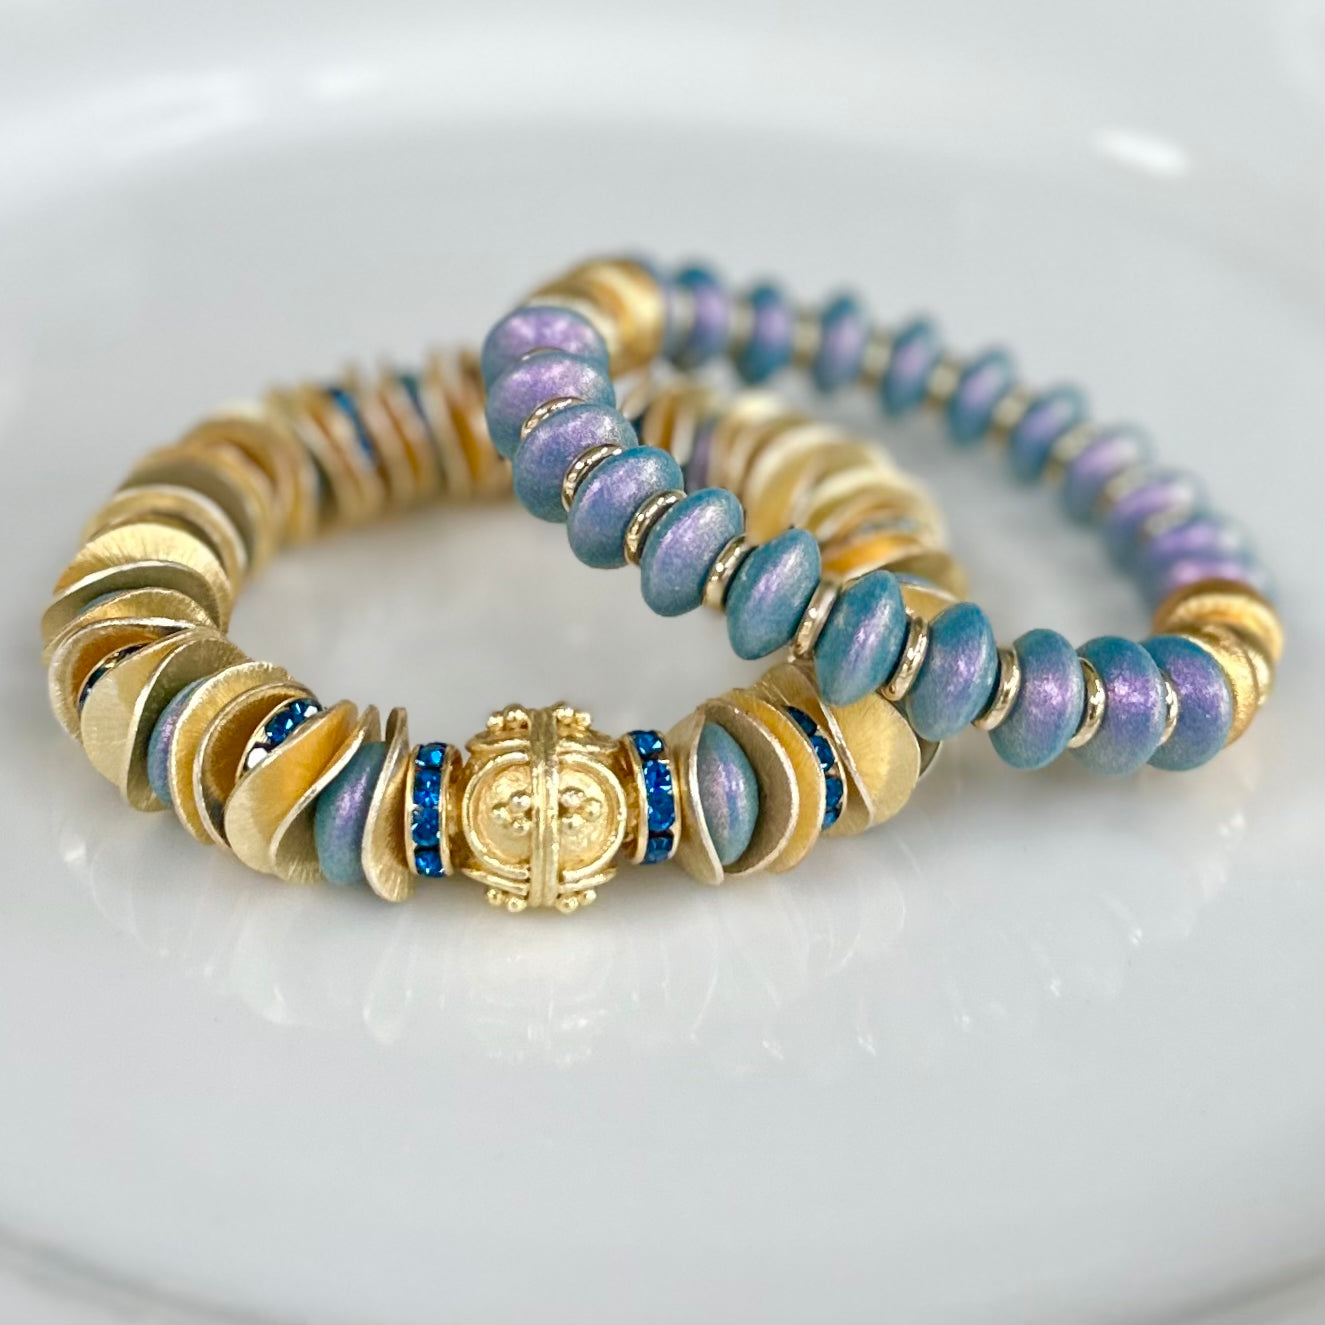 NEW! OPALIZED STEEL BLUE COIL BRACELET WITH GOLD ACCENTS